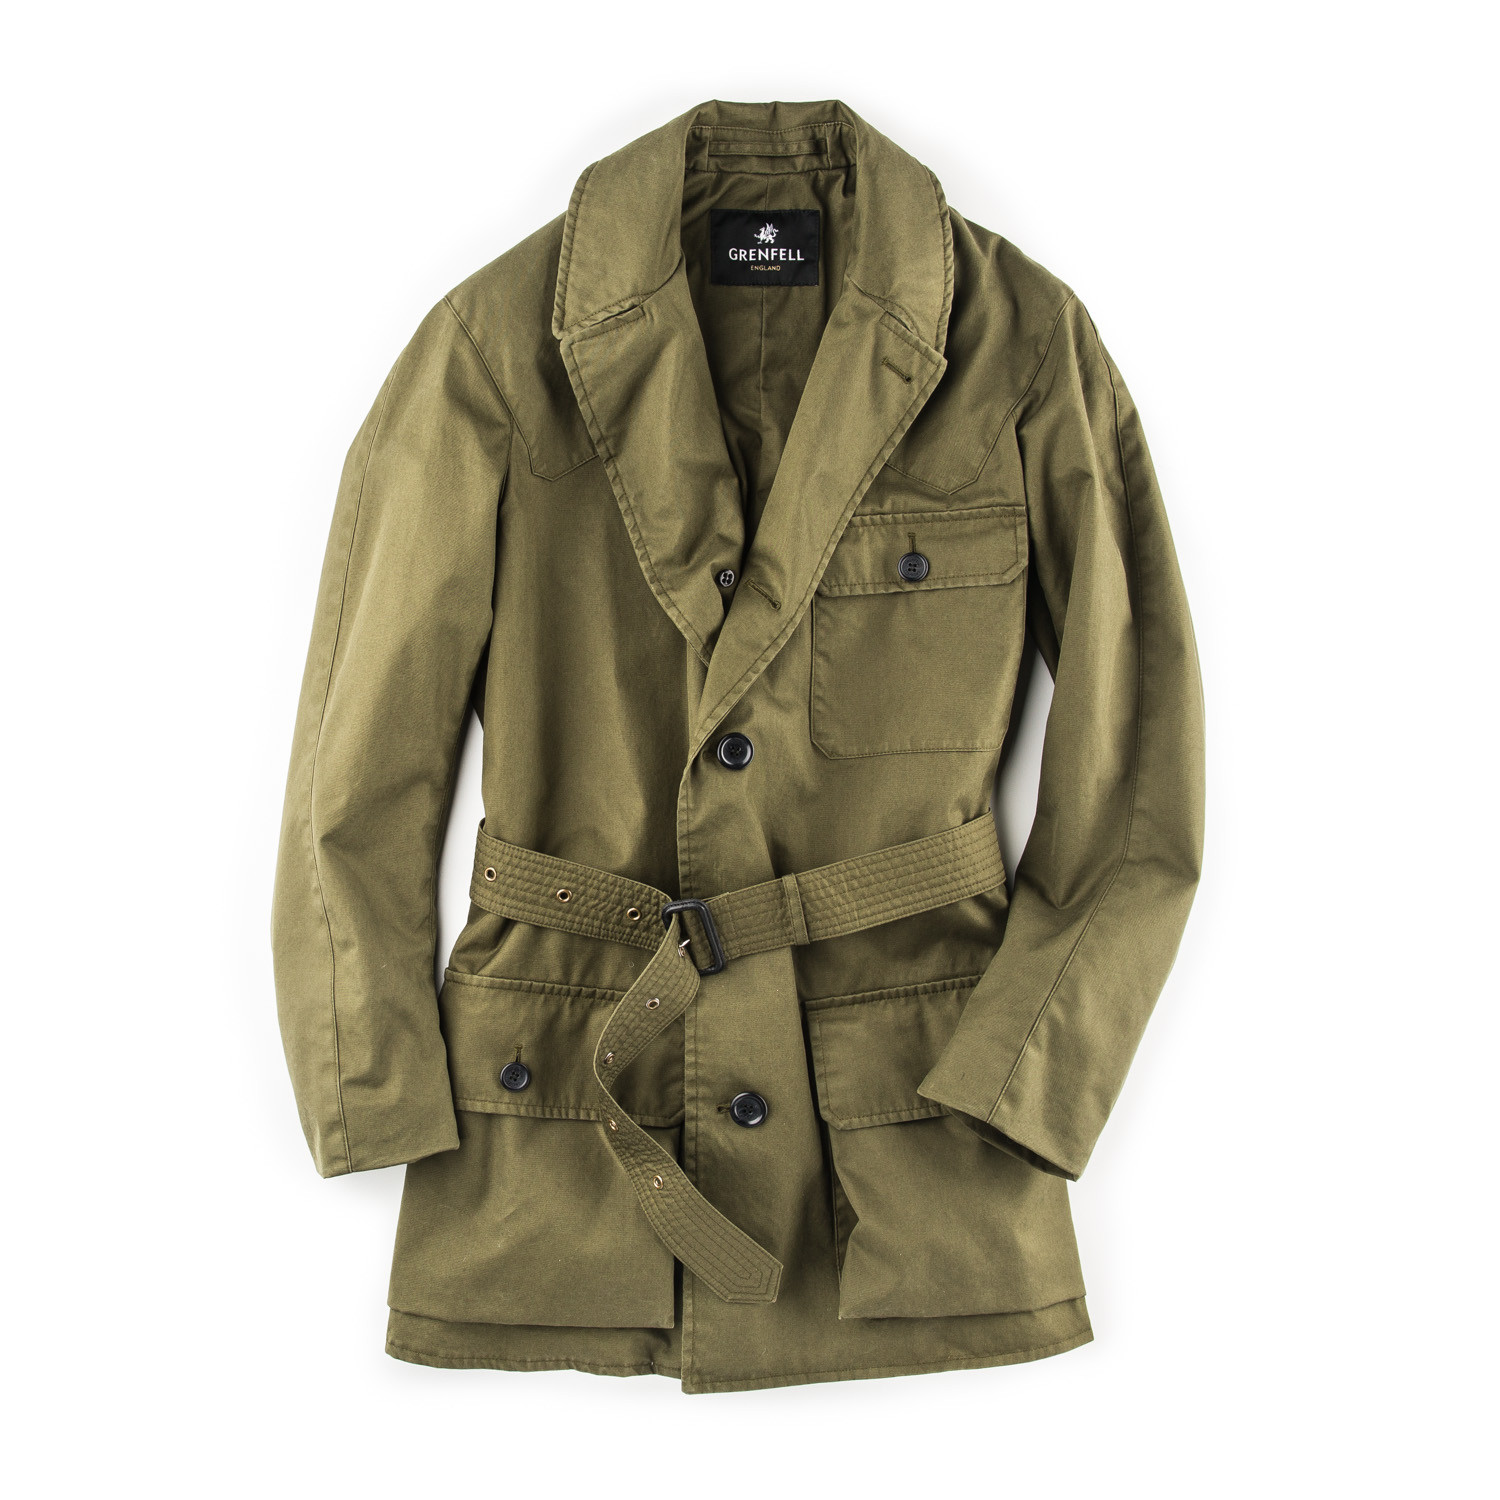 Grenfell - The Shooter Jacket - Green